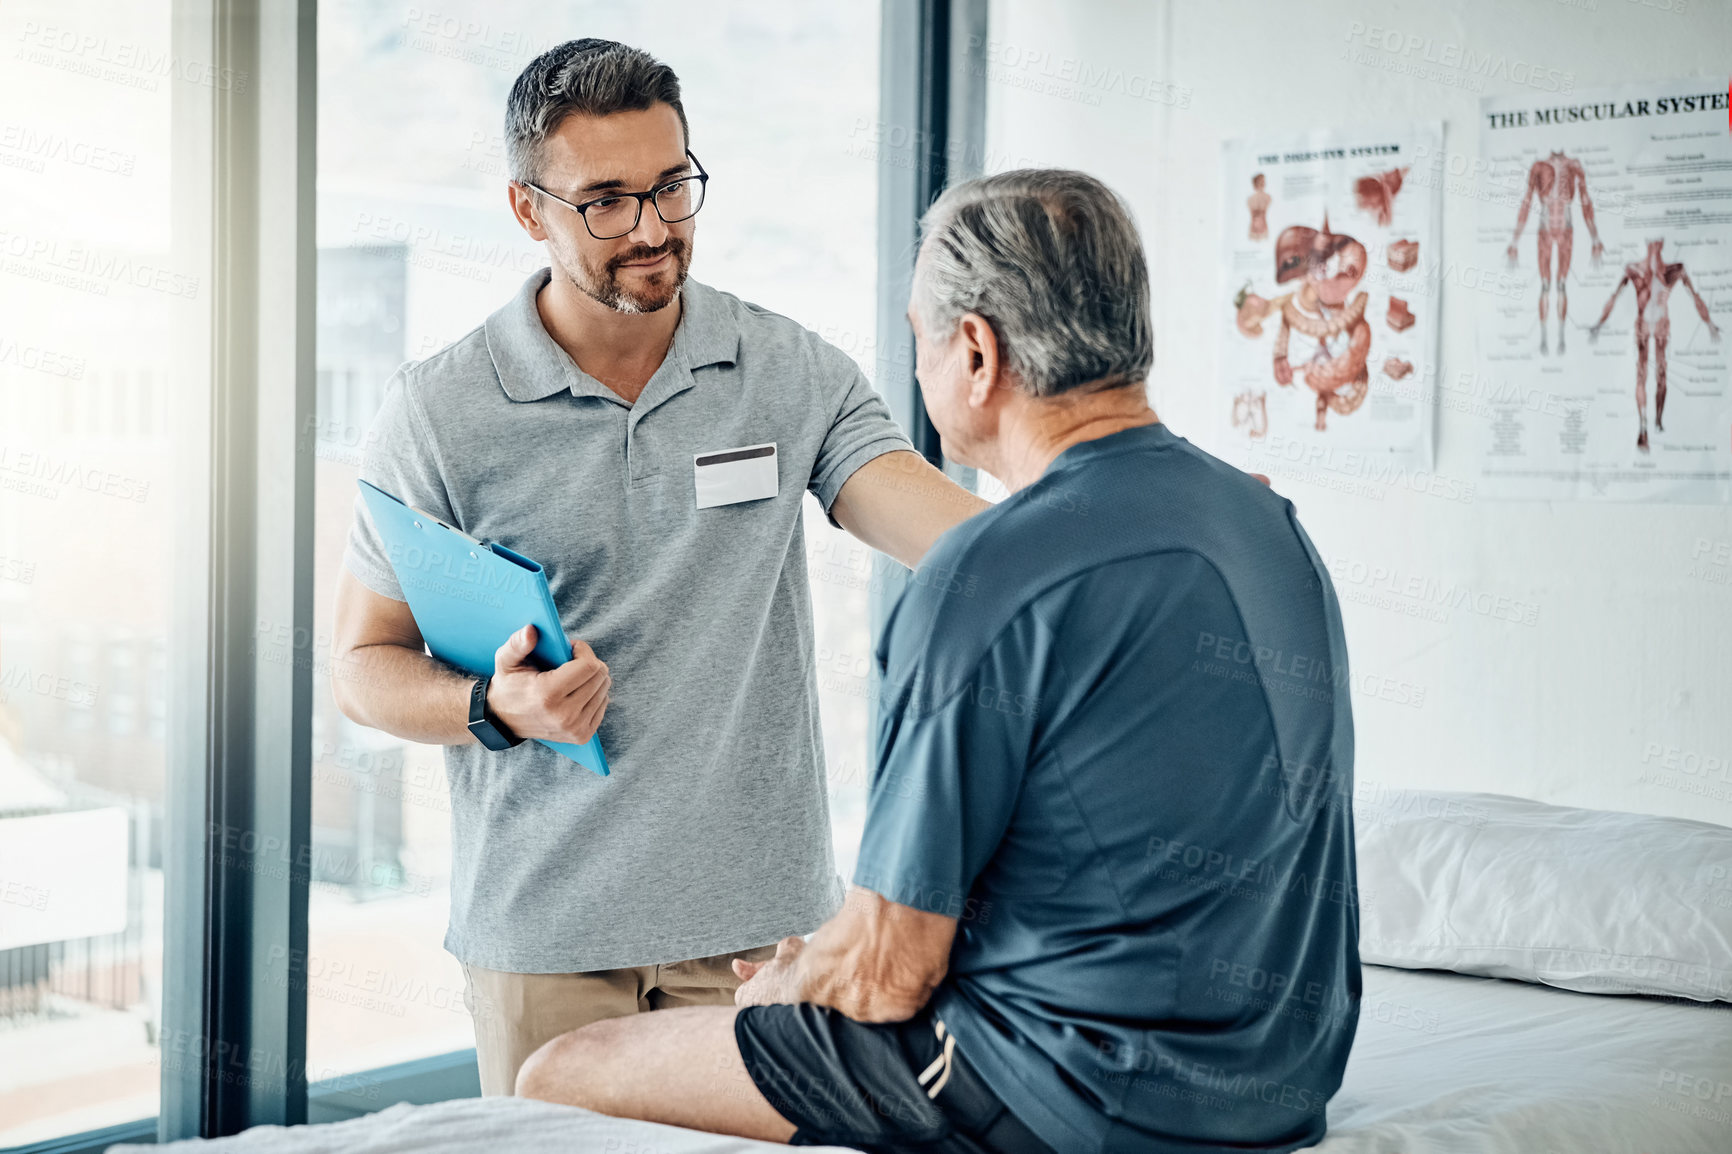 Buy stock photo Shot of a caring physiotherapist consulting with his mature patient in the rehabilitation center